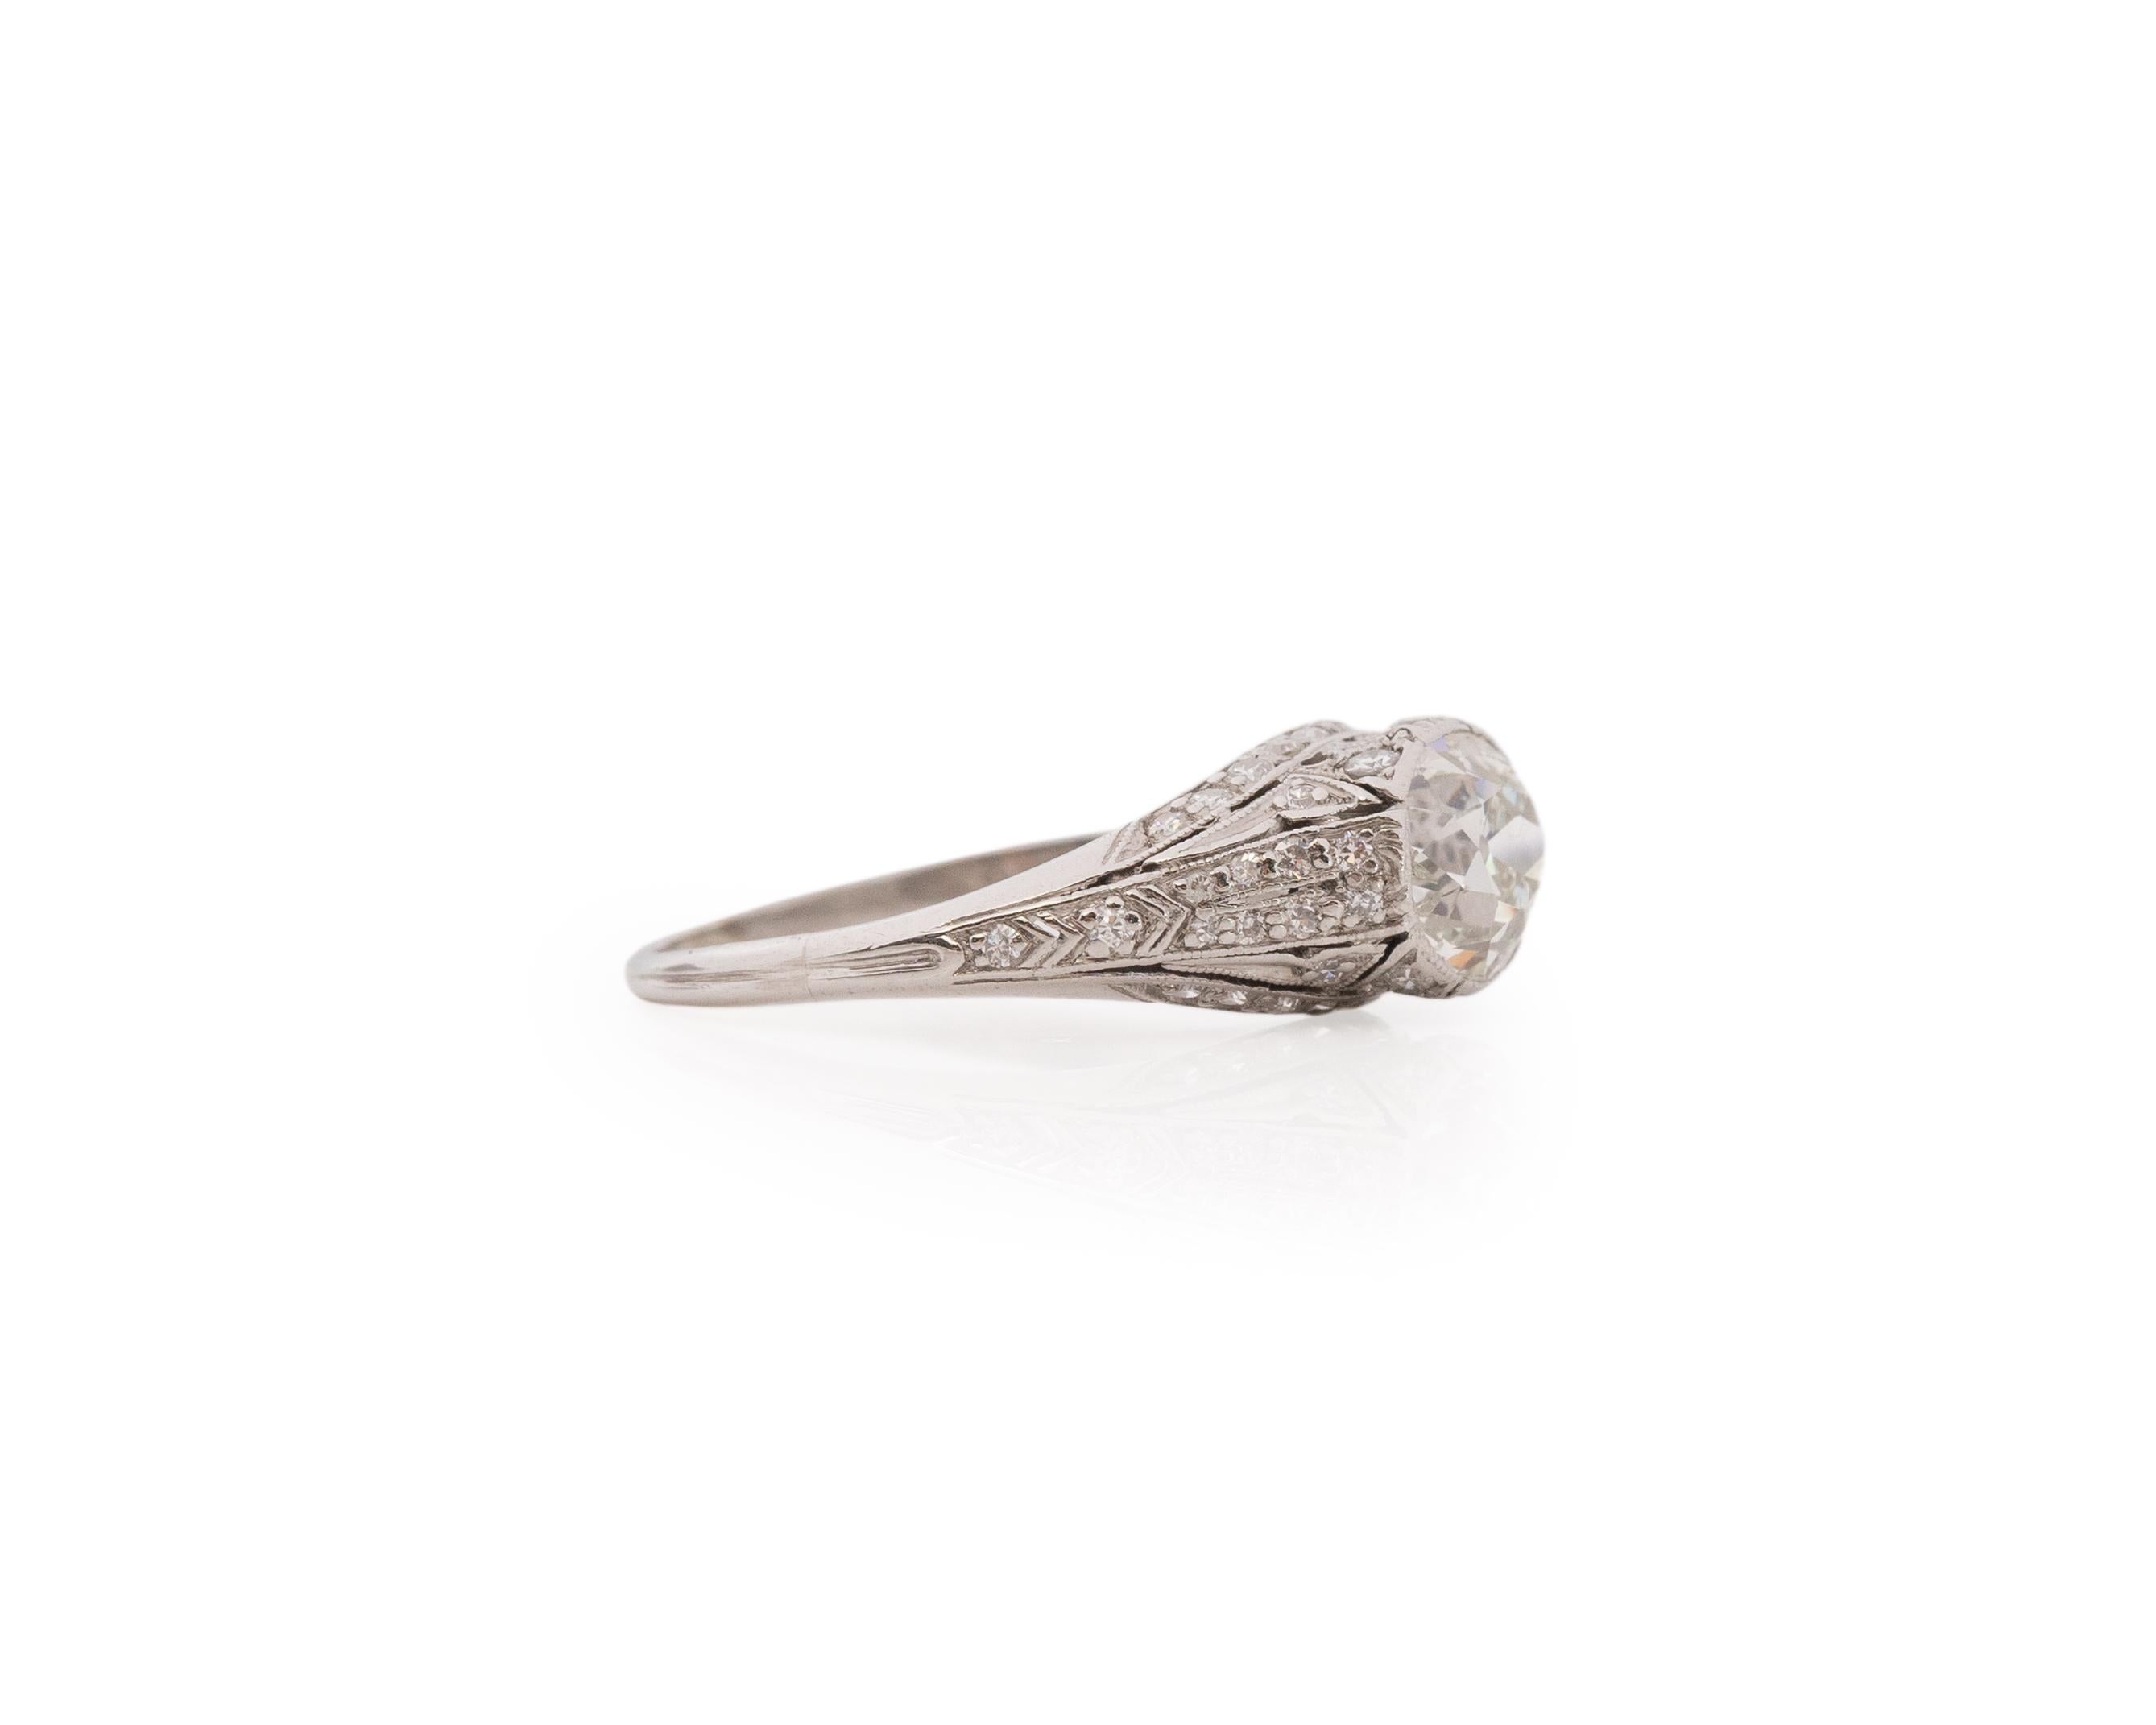 Ring Size: 6.5
Metal Type: Platinum [Hallmarked, and Tested]
Weight: 4.1 grams

Center Diamond Details:
GIA LAB REPORT #:5222897038
Weight: 1.33ct
Cut: Old Mine Brilliant
Color: K
Clarity: SI2
Measurements: 6.76mm x 6.41mm x 4.40mm

Side Diamond